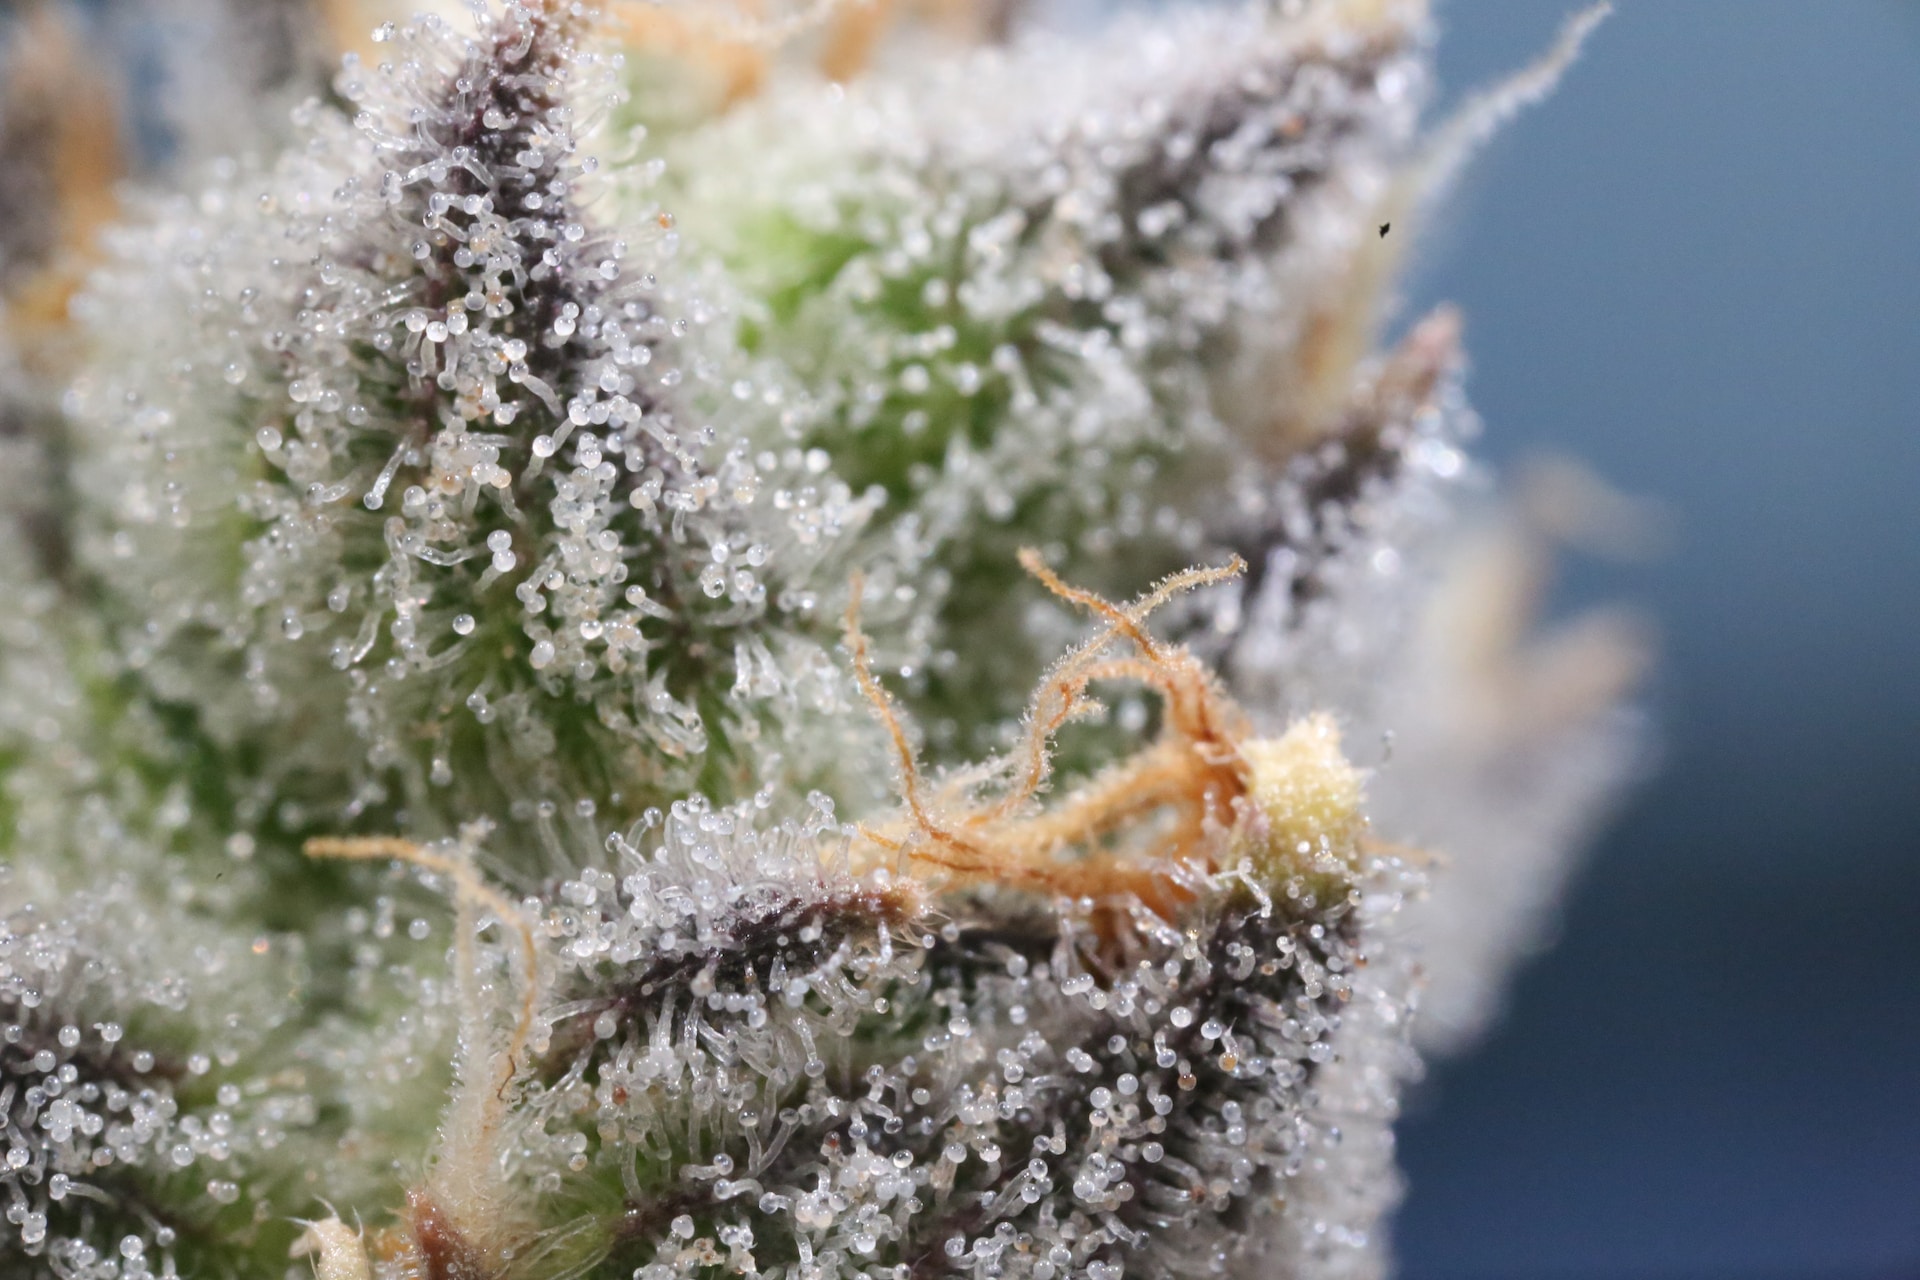 What are terpenes and THC and how do they affect your high? Click here to explore the difference between terpenes vs THC.